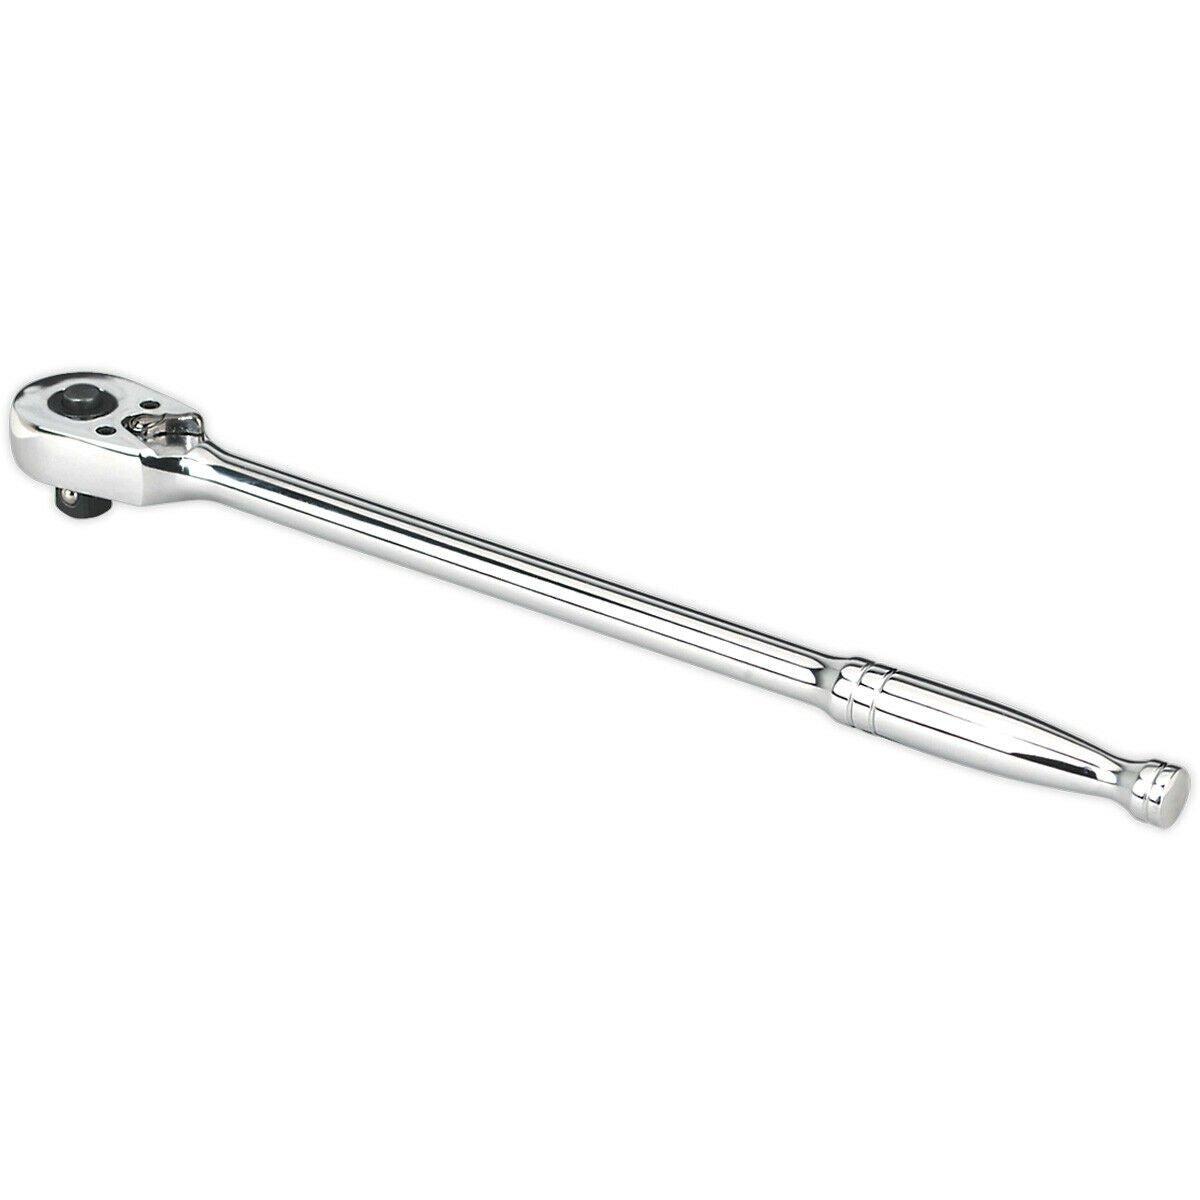 Long Reach 48-Tooth Pear-Head Ratchet Wrench - 1/2 Inch Sq Drive - Flip Reverse